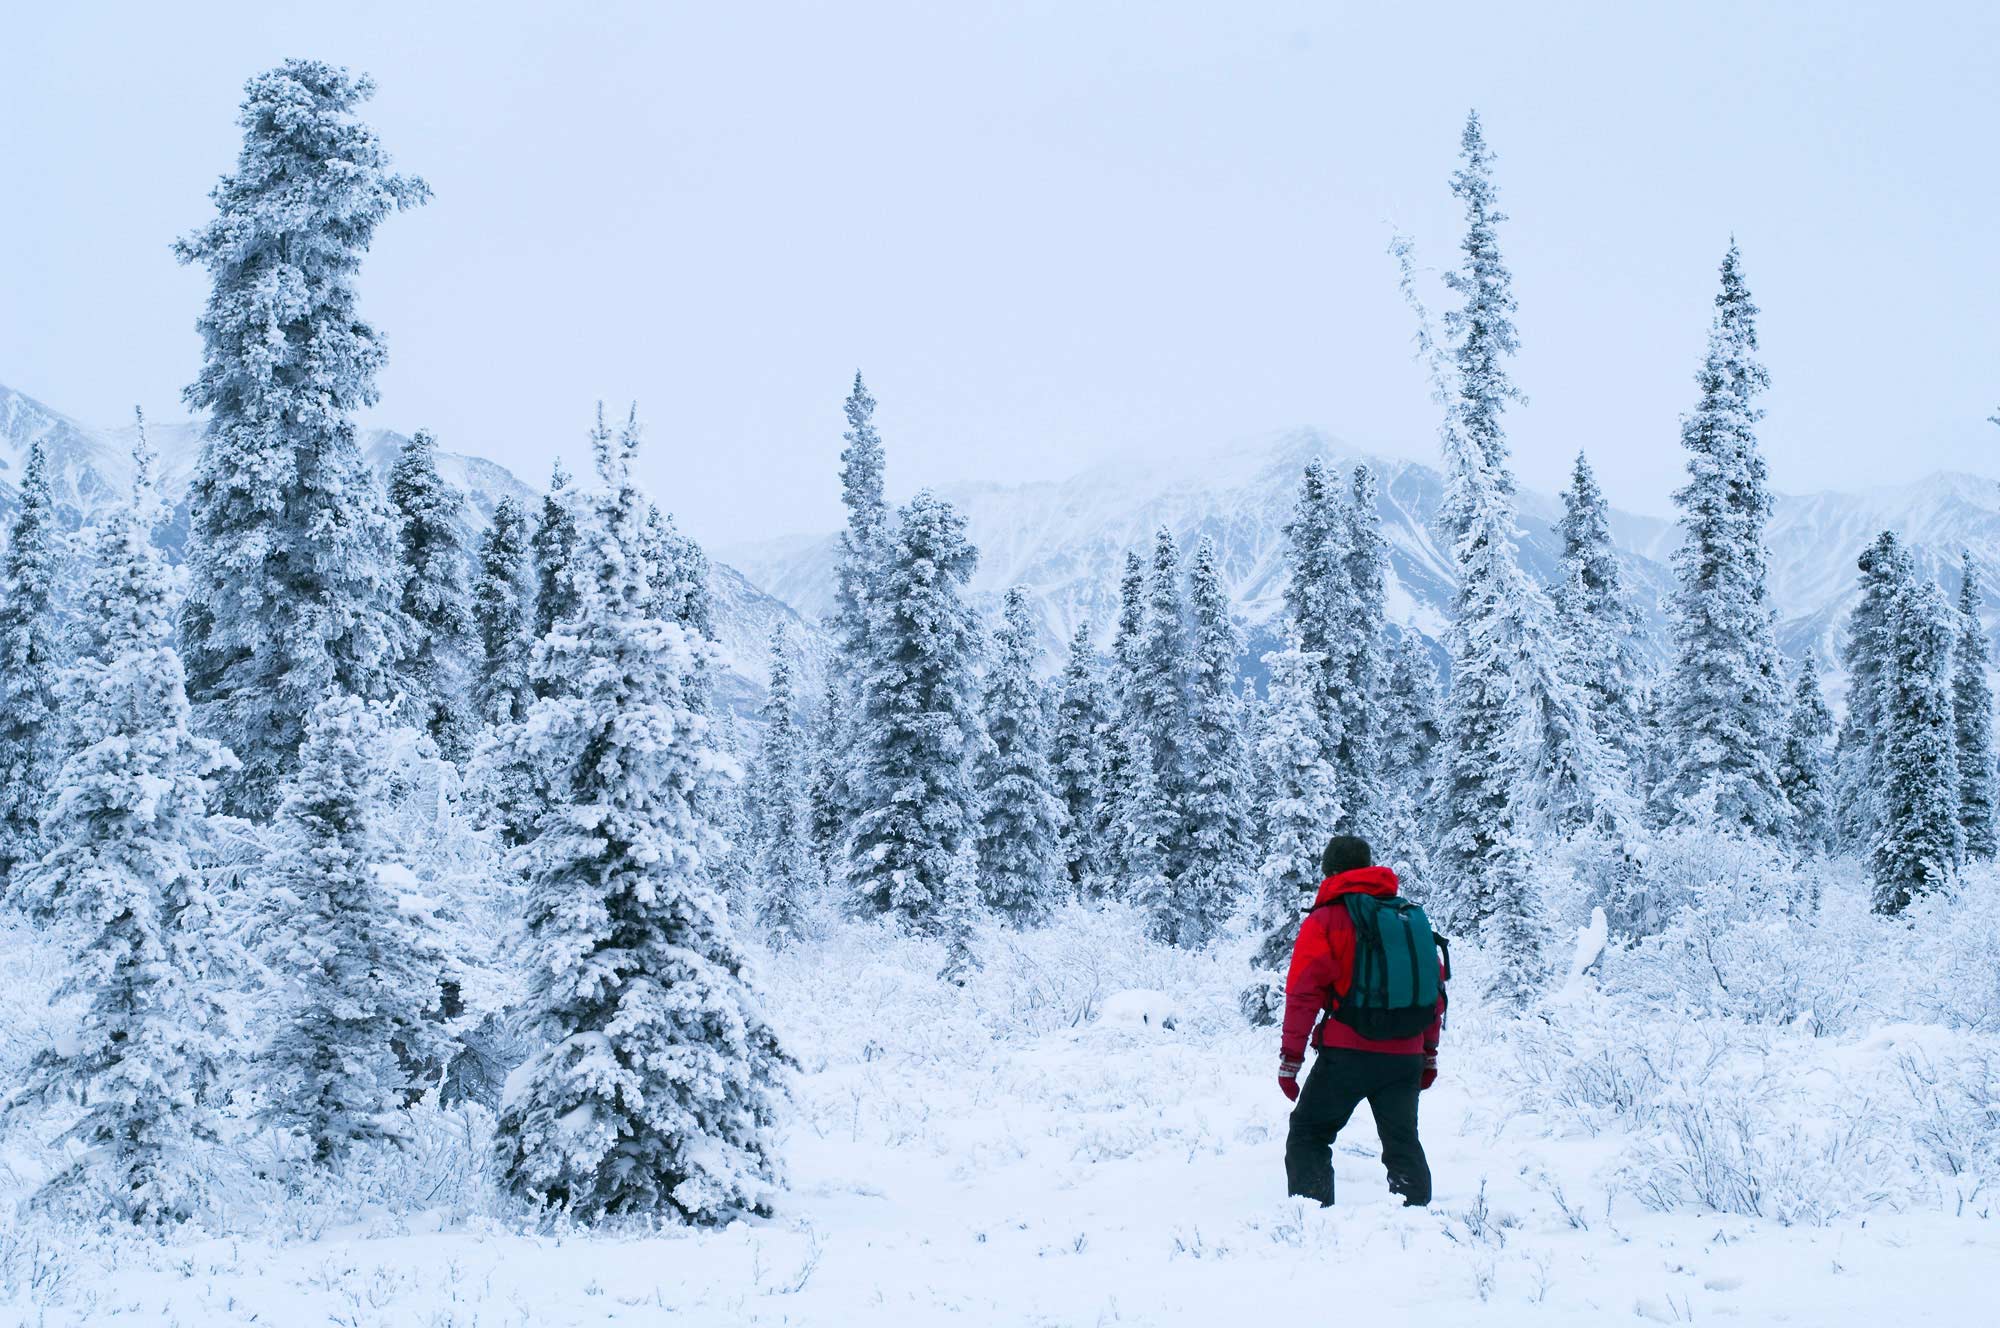 Exercise Outdoors in Winter and Stay Safe | Readers Digest